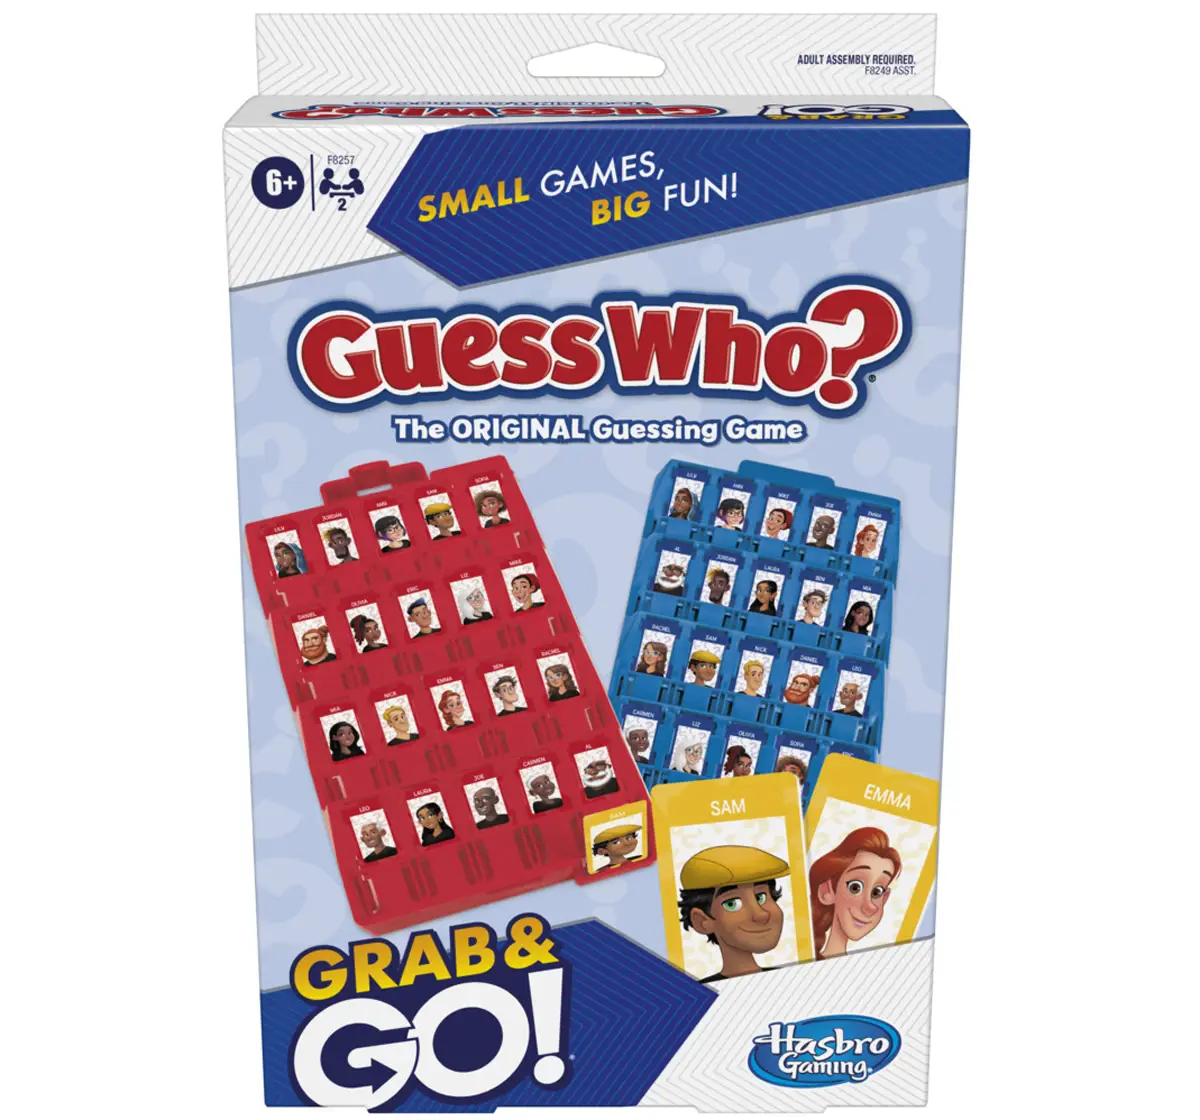 Hasbro Gaming Guess Who? Grab and Go Game Original Guessing Game, 6Y+